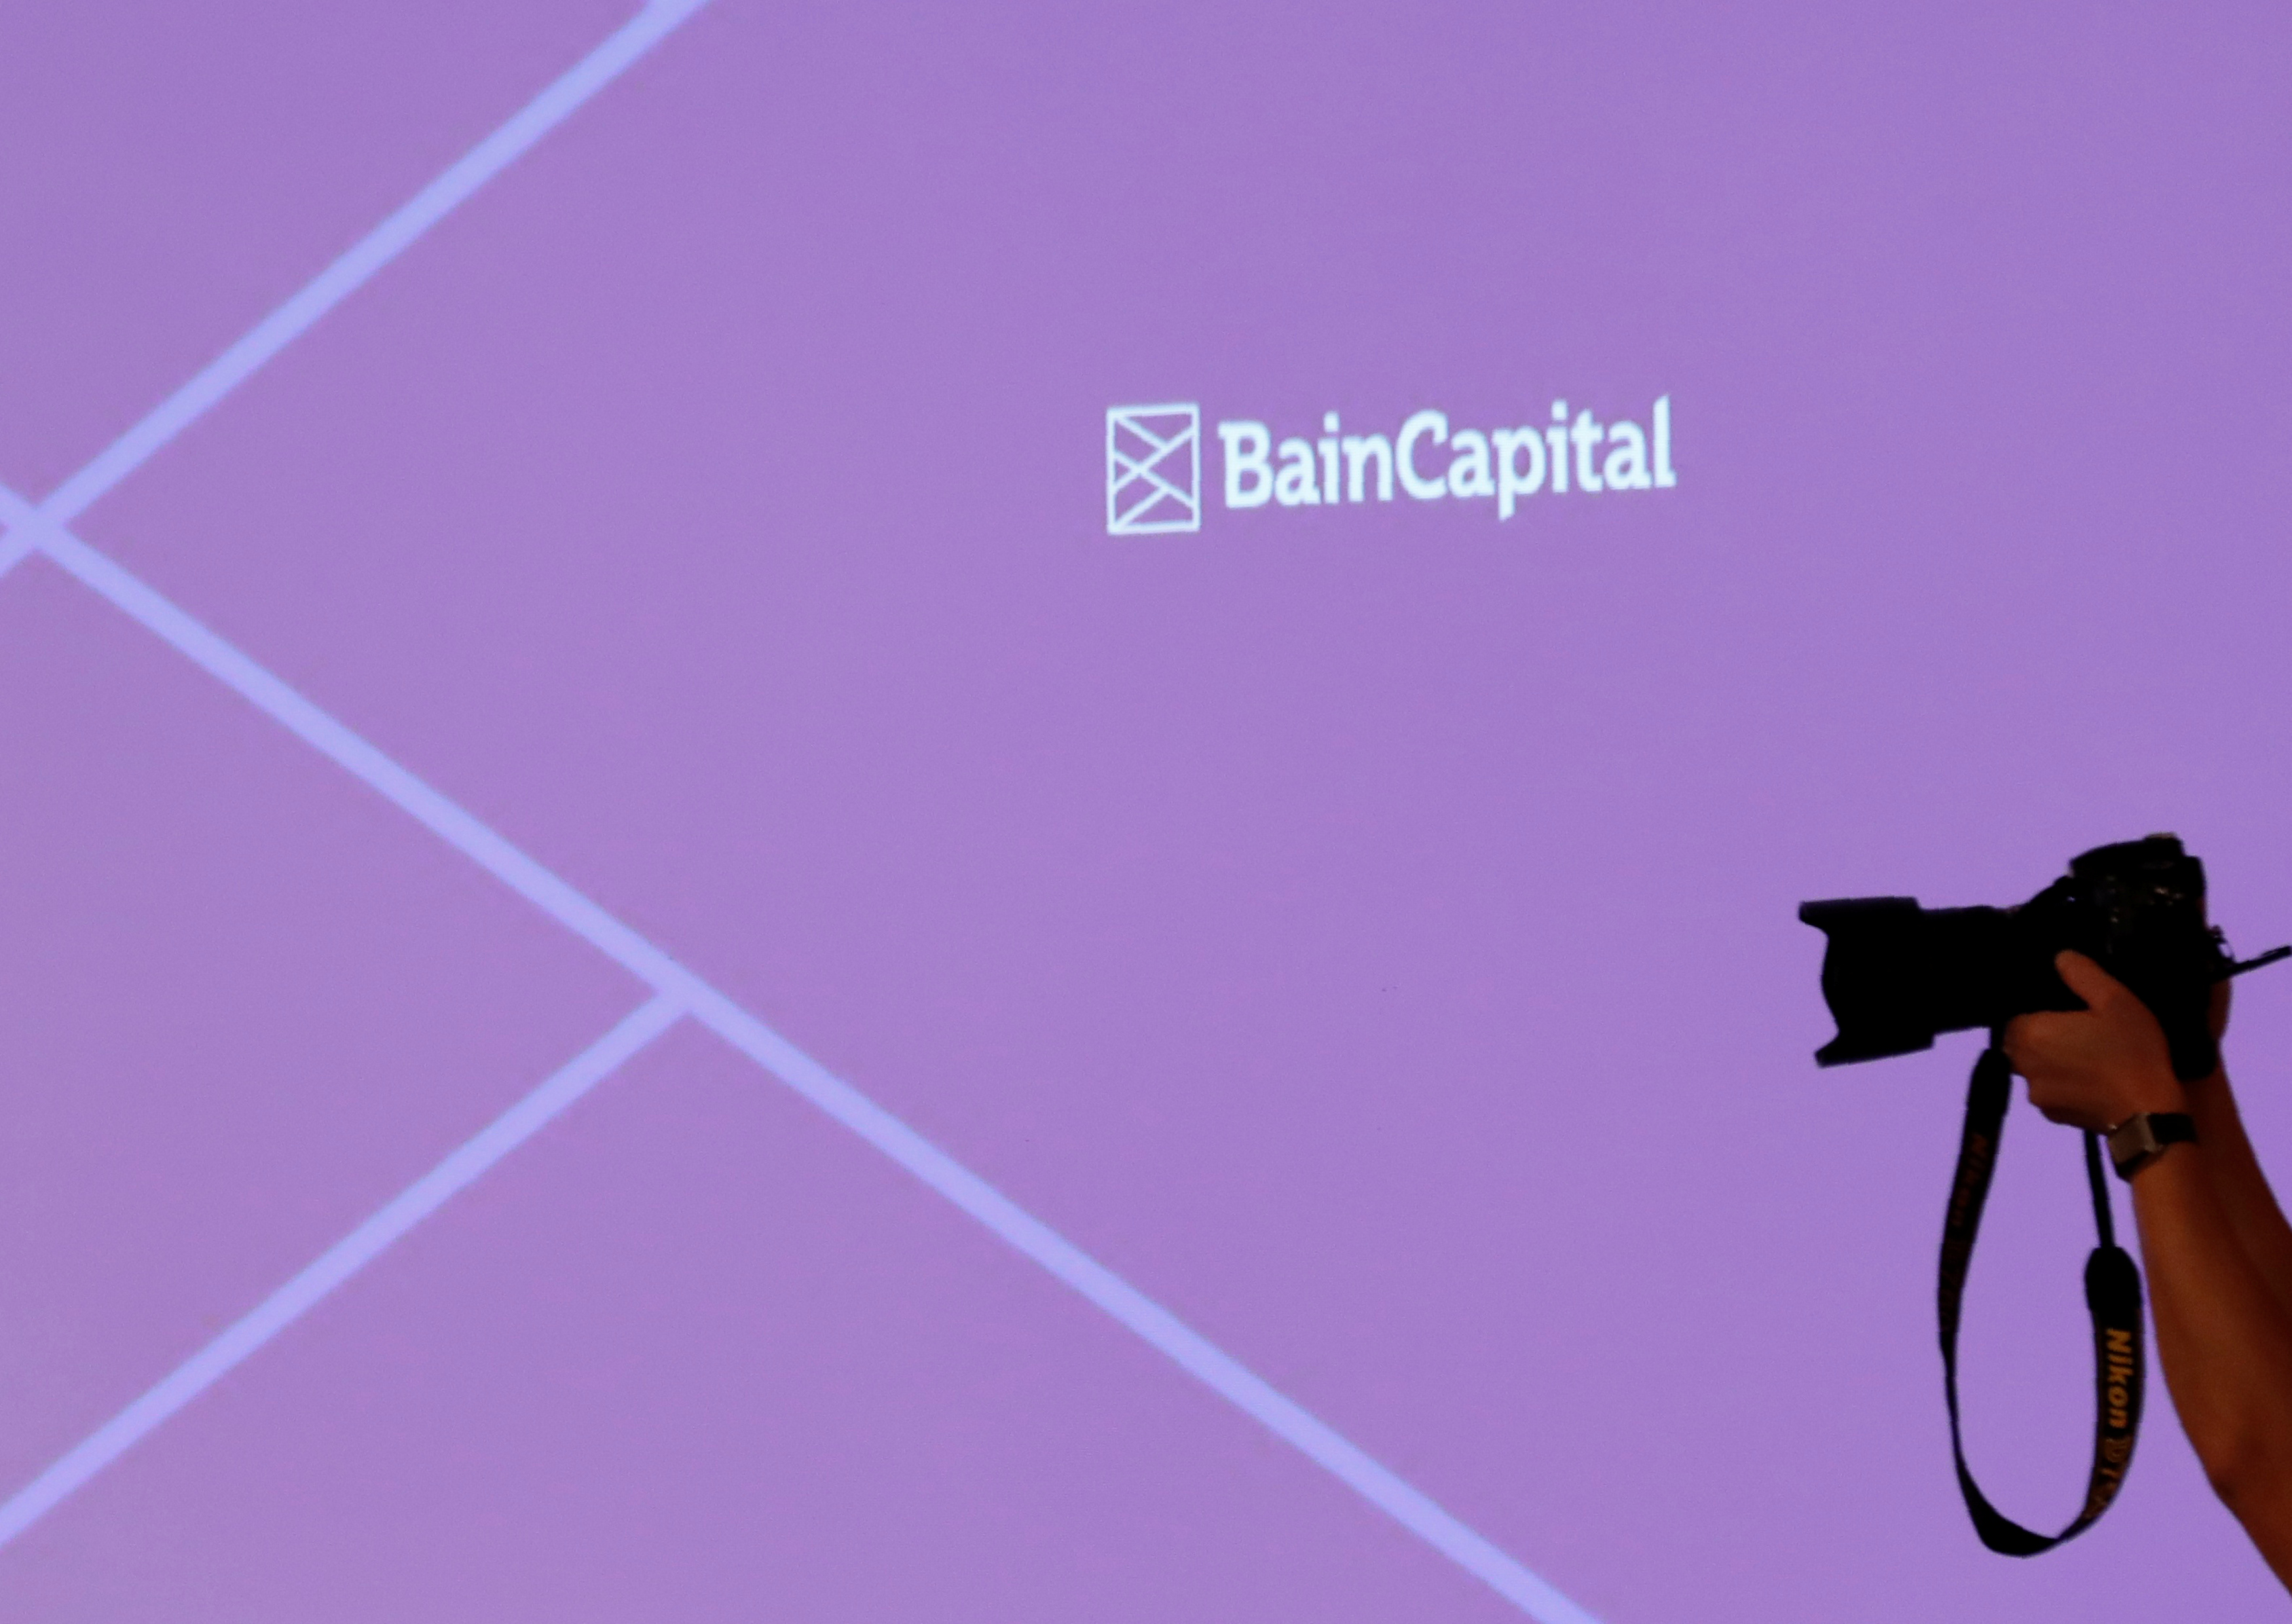 The logo of Bain Capital is displayed on the screen during a news conference in Tokyo